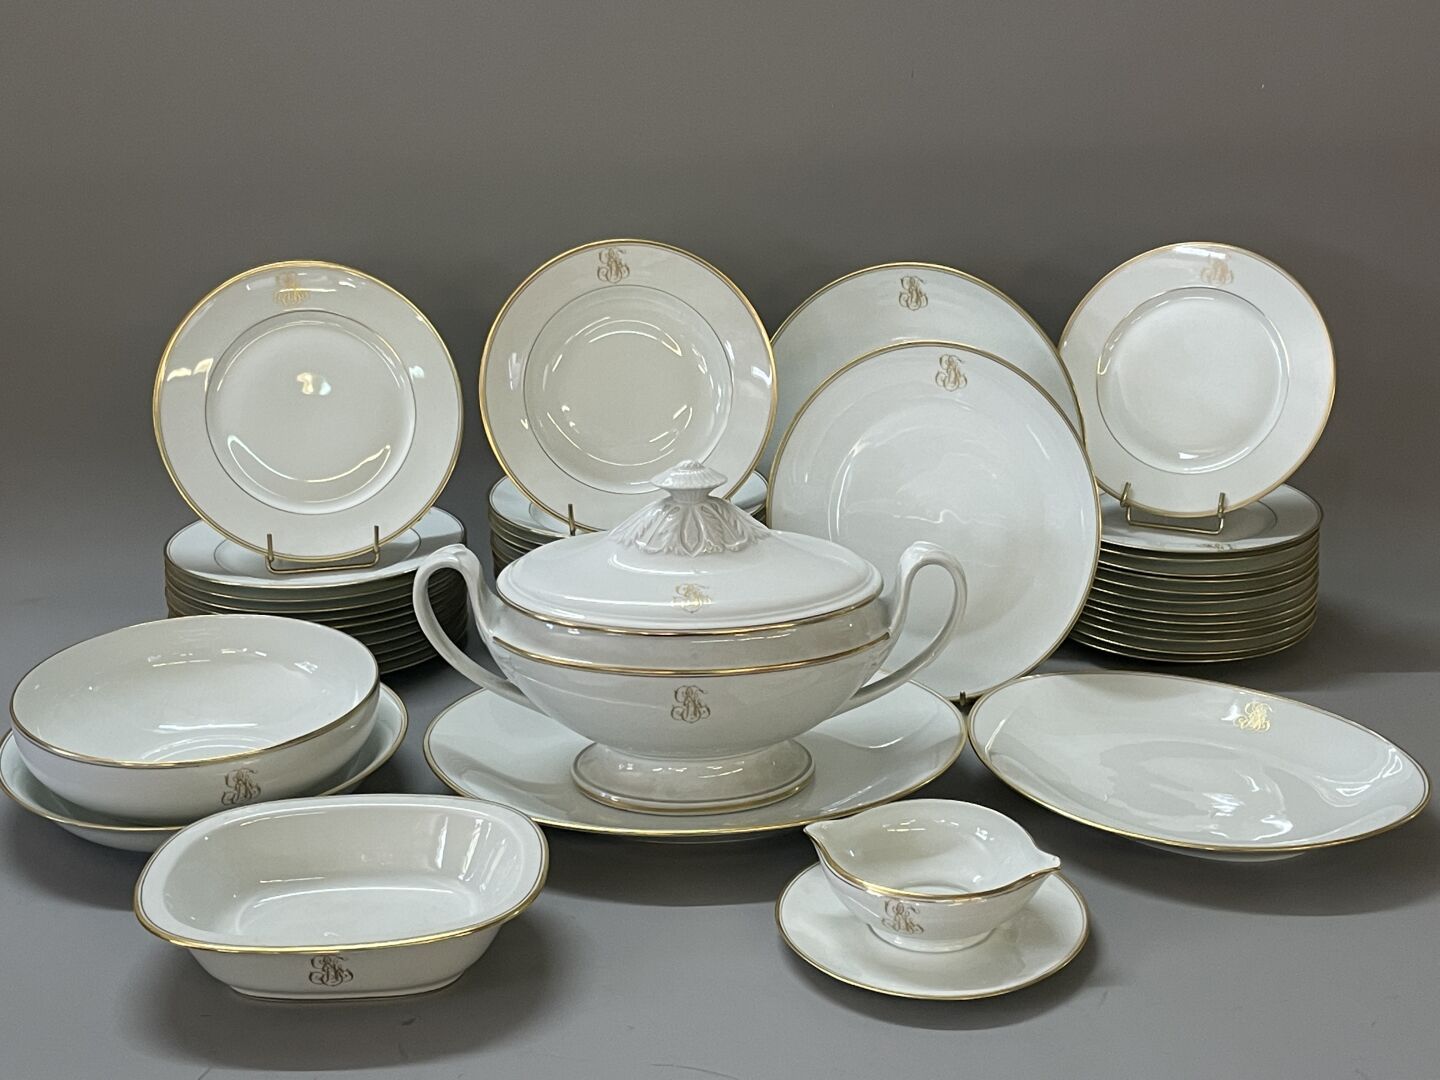 Null Service of table in porcelain of Limoges including:

Eleven dinner plates. &hellip;